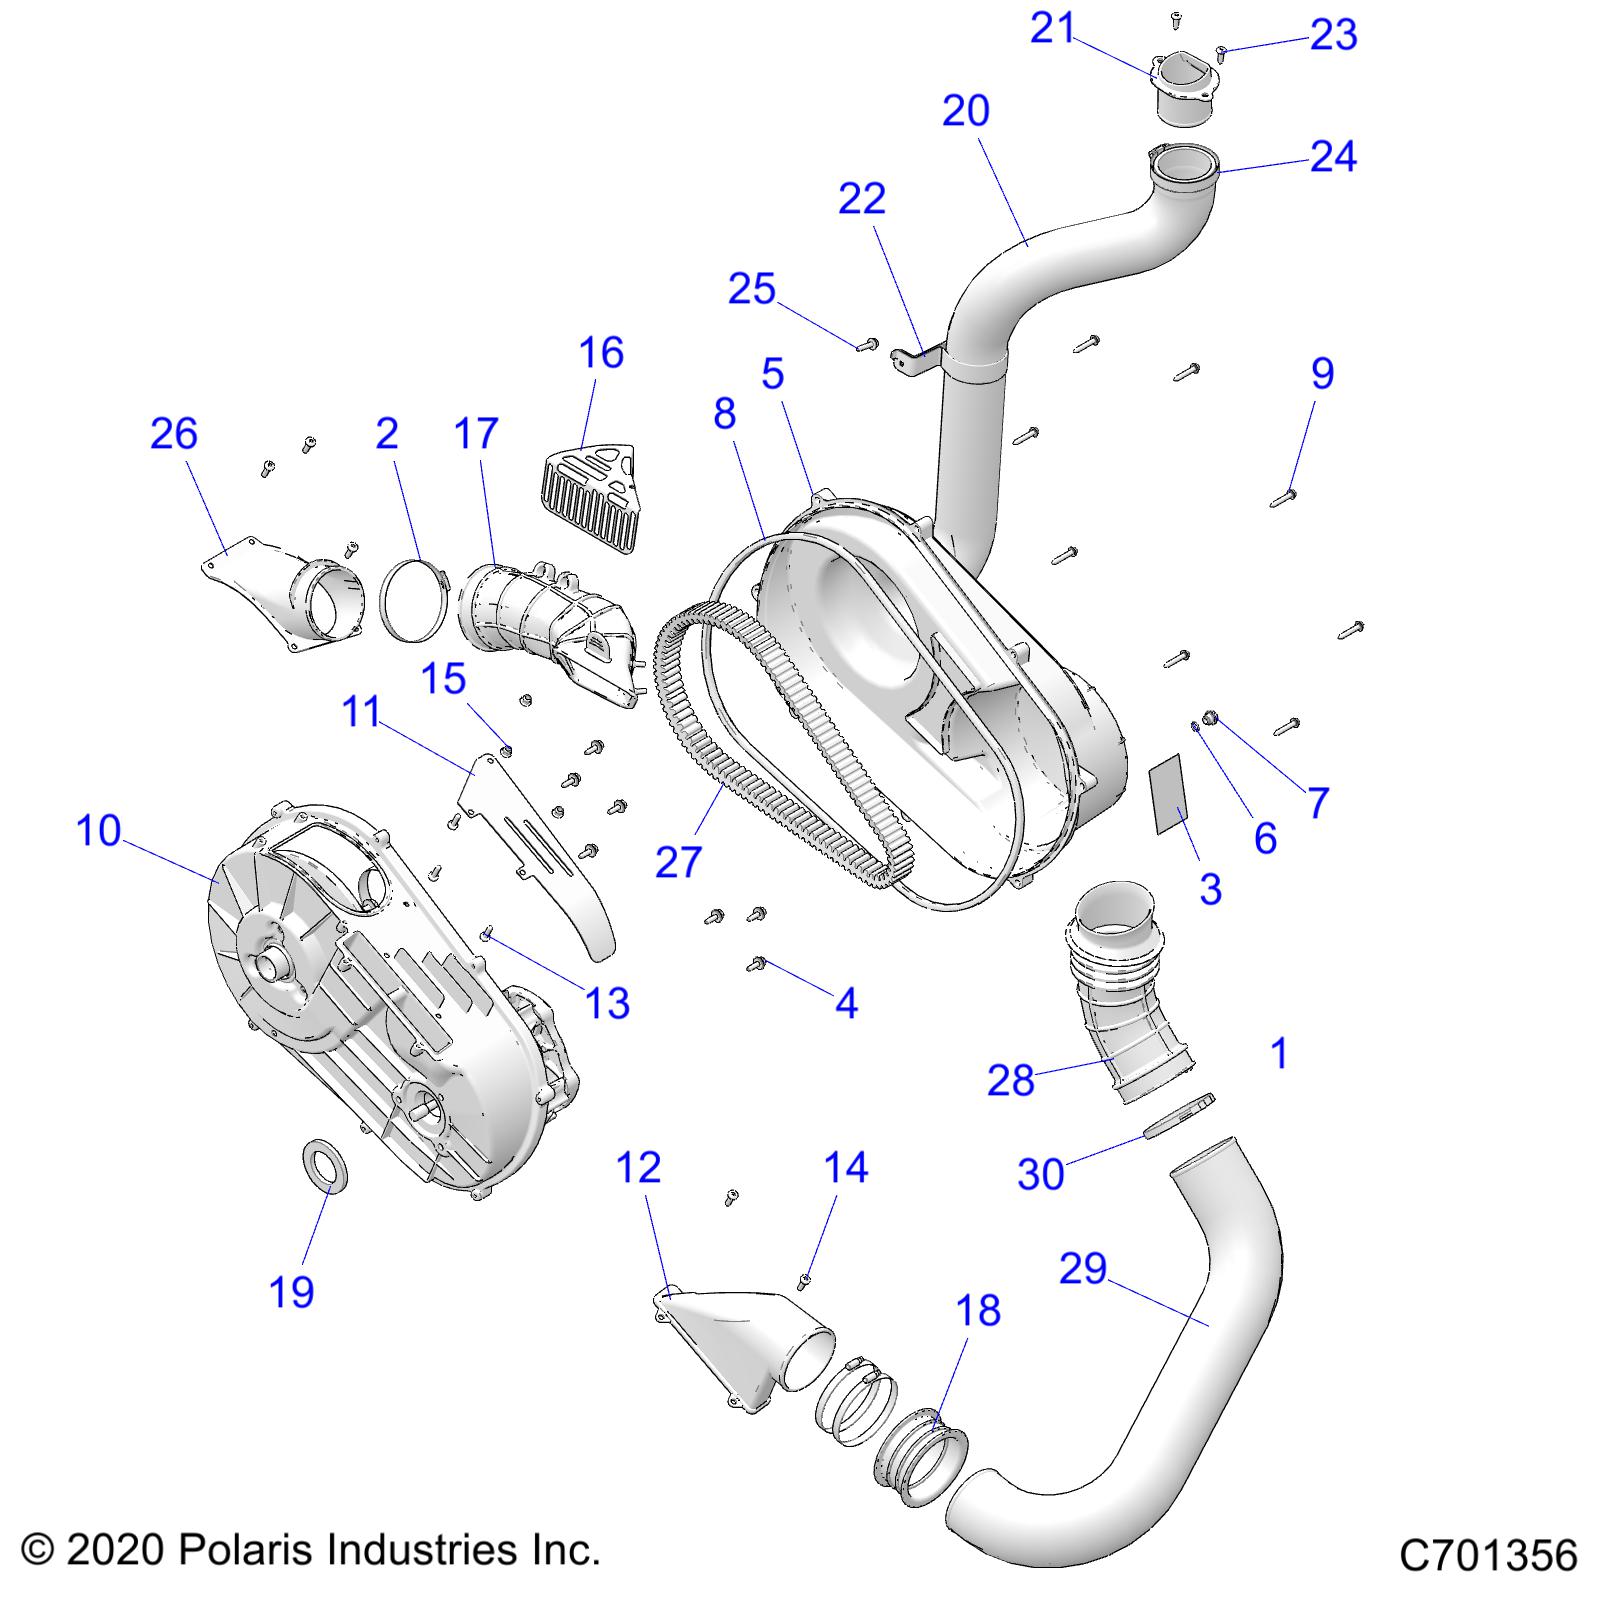 Part Number : 5450655 INTAKE DUCT  CLUTCH  AIR